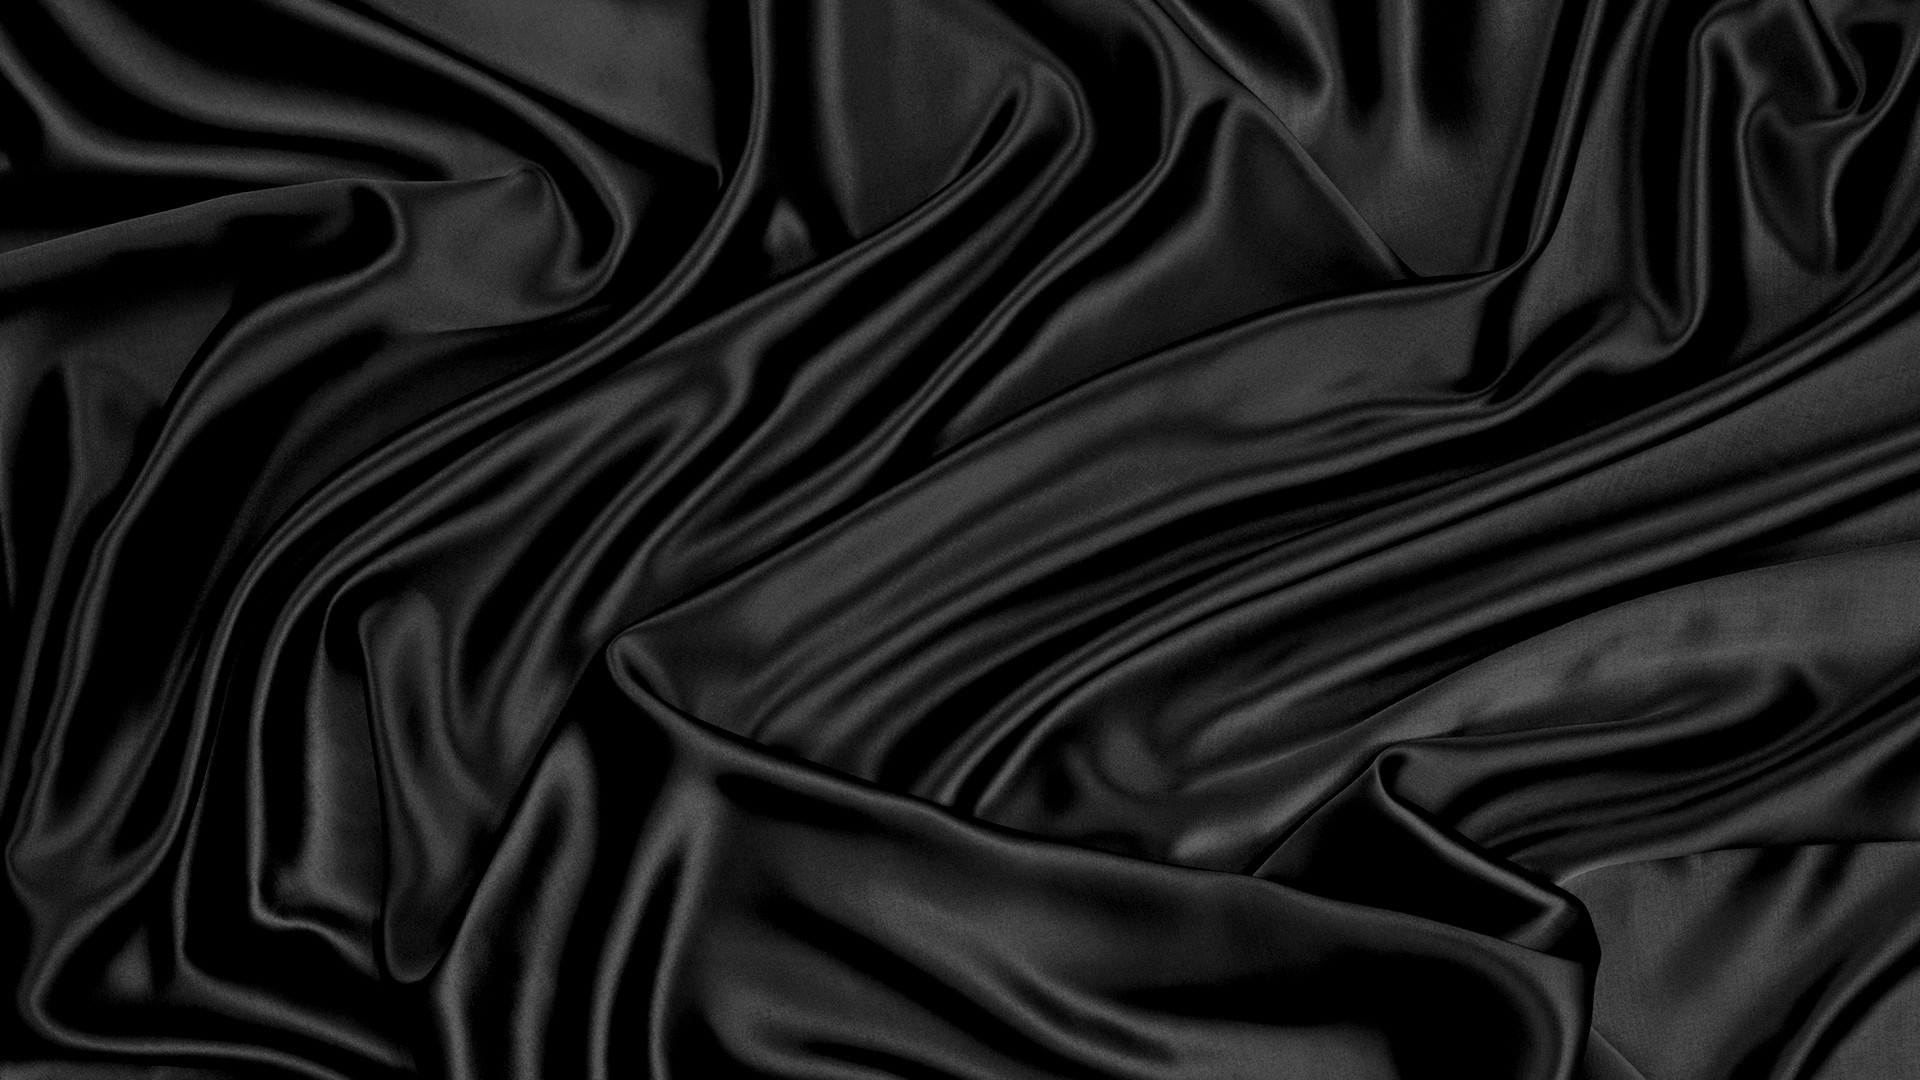 Black Silk iPhone X Wallpaper with high-resolution 1920x1080 pixel. You can use this wallpaper for your iPhone 5, 6, 7, 8, X, XS, XR backgrounds, Mobile Screensaver, or iPad Lock Screen